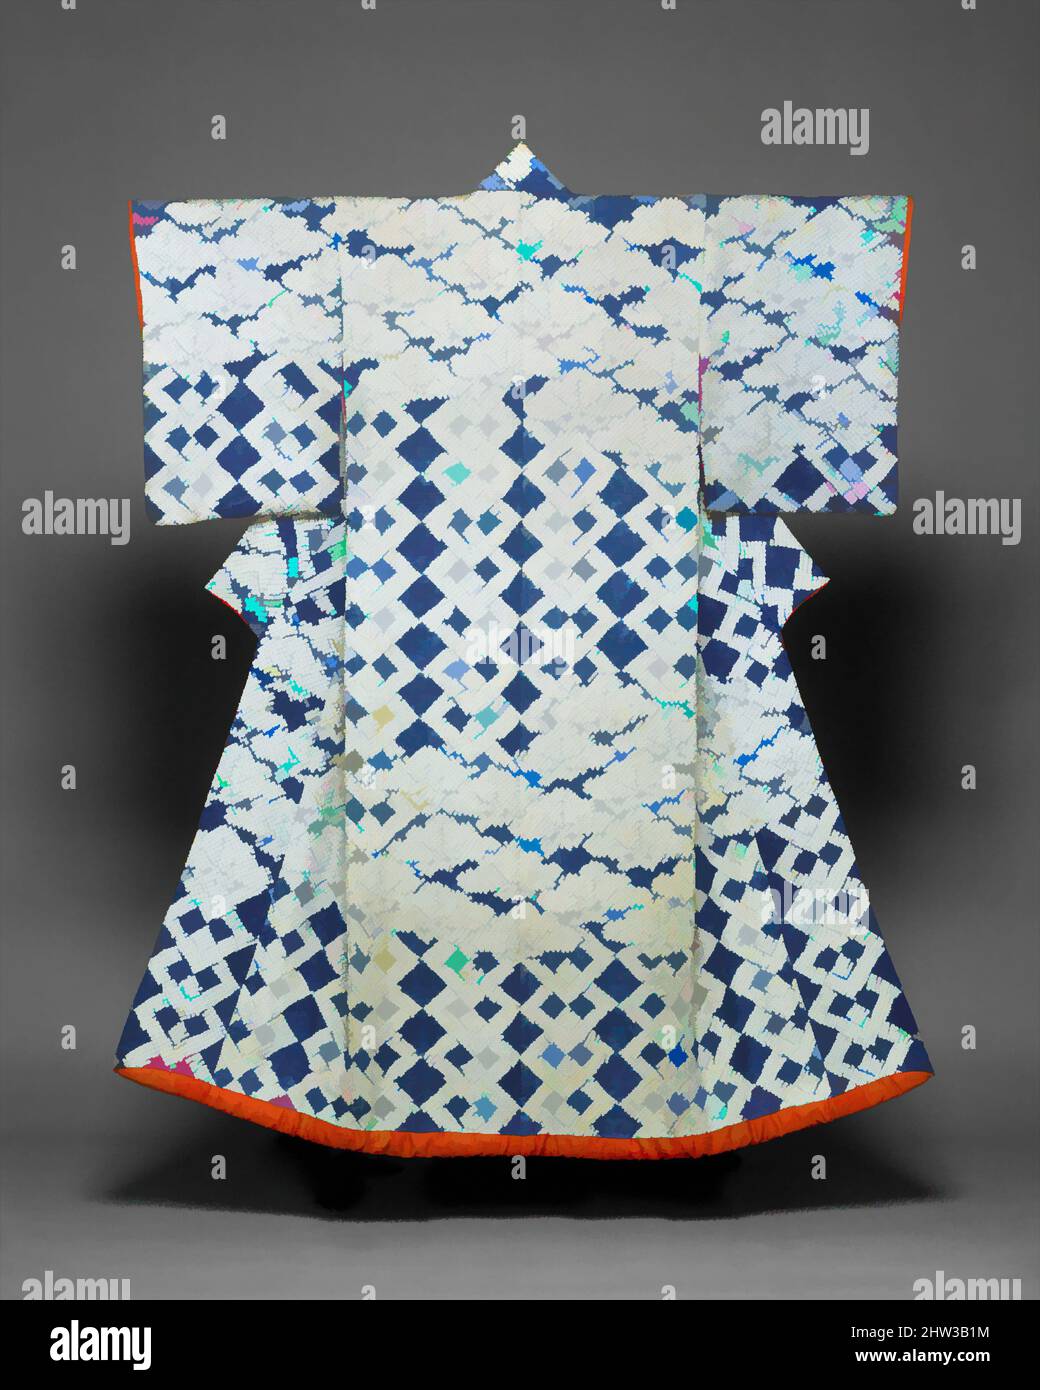 Art inspired by 藍綸子地松鎖模様振袖, Kosode with Design of Pines and Interlocking Squares, Edo period (1615–1868), second half of the 18th century, Japan, Tie-dyed (shibori) pattern on figured silk satin (rinzu), 71 x 50 in. (180.3 x 127 cm), Costumes, This garment's design juxtaposes, Classic works modernized by Artotop with a splash of modernity. Shapes, color and value, eye-catching visual impact on art. Emotions through freedom of artworks in a contemporary way. A timeless message pursuing a wildly creative new direction. Artists turning to the digital medium and creating the Artotop NFT Stock Photo